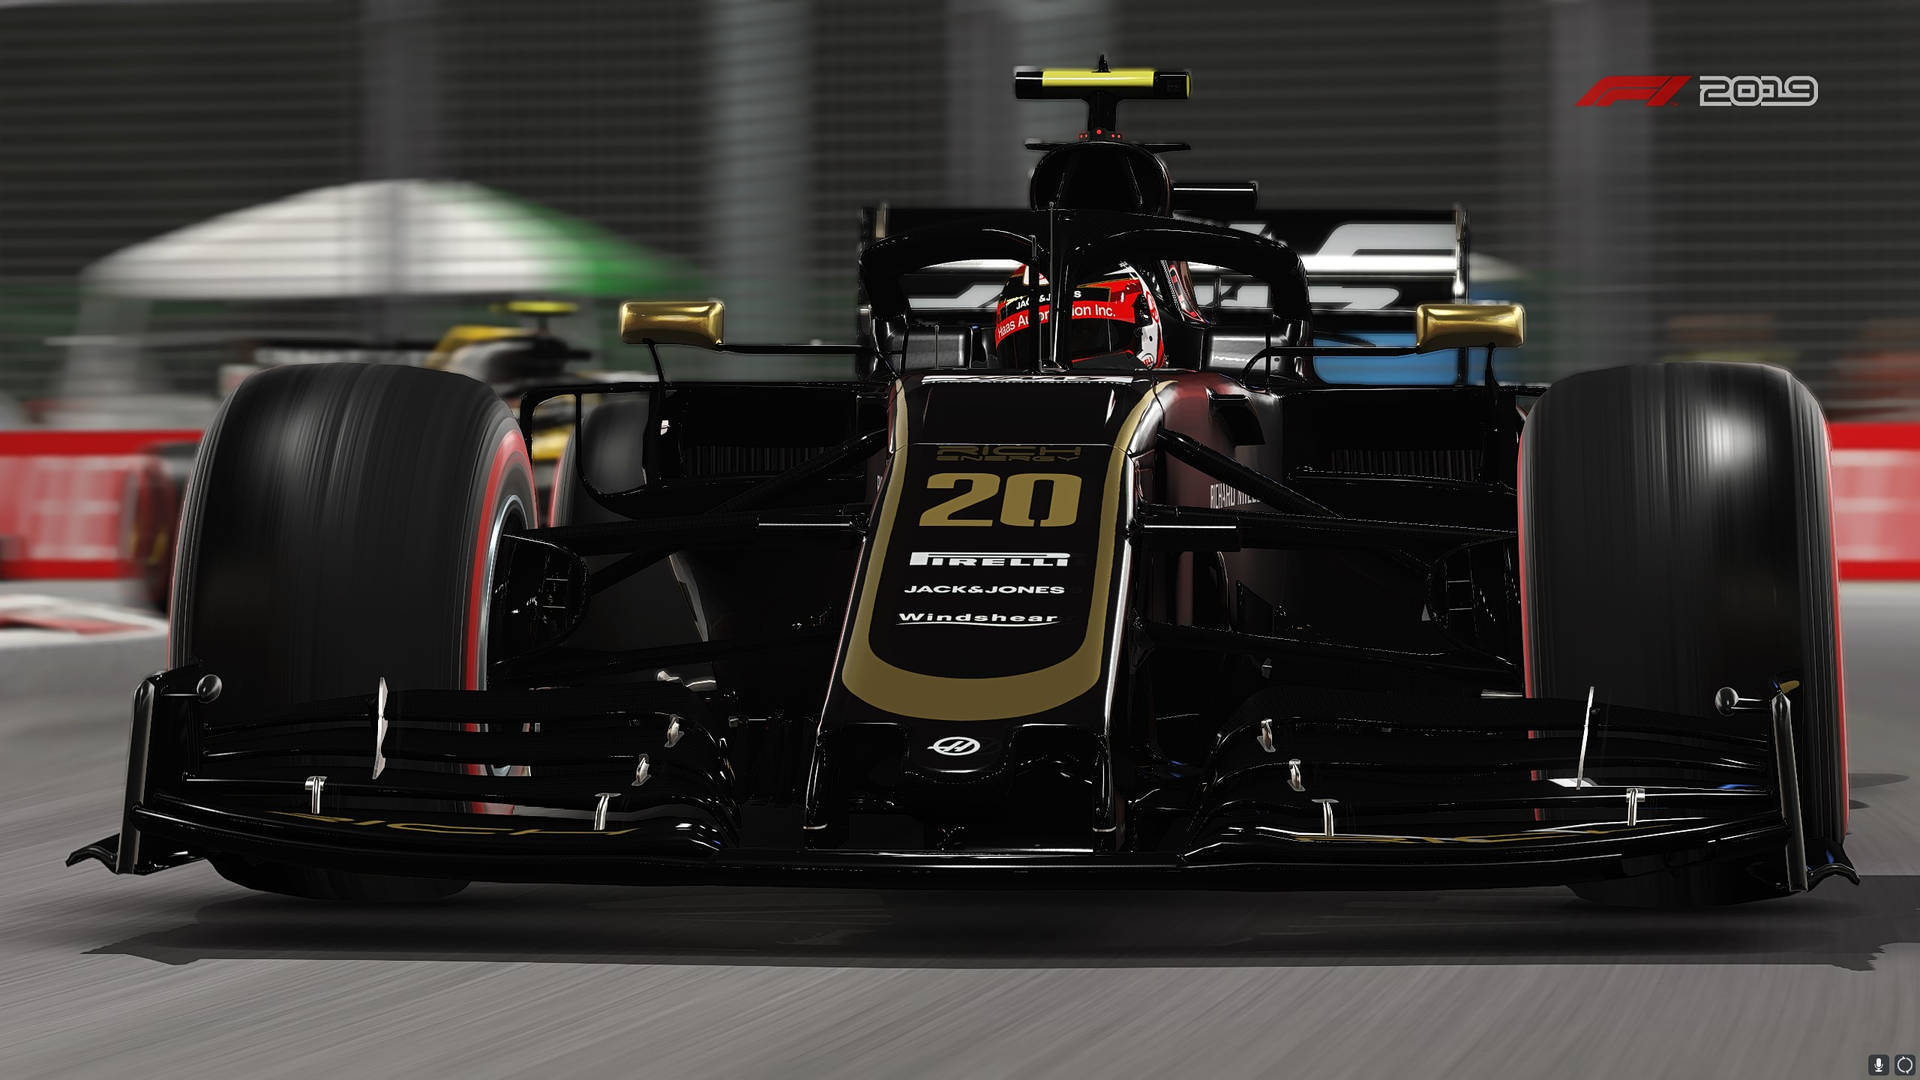 Closeup Of Haas' F1 2019 Car Background